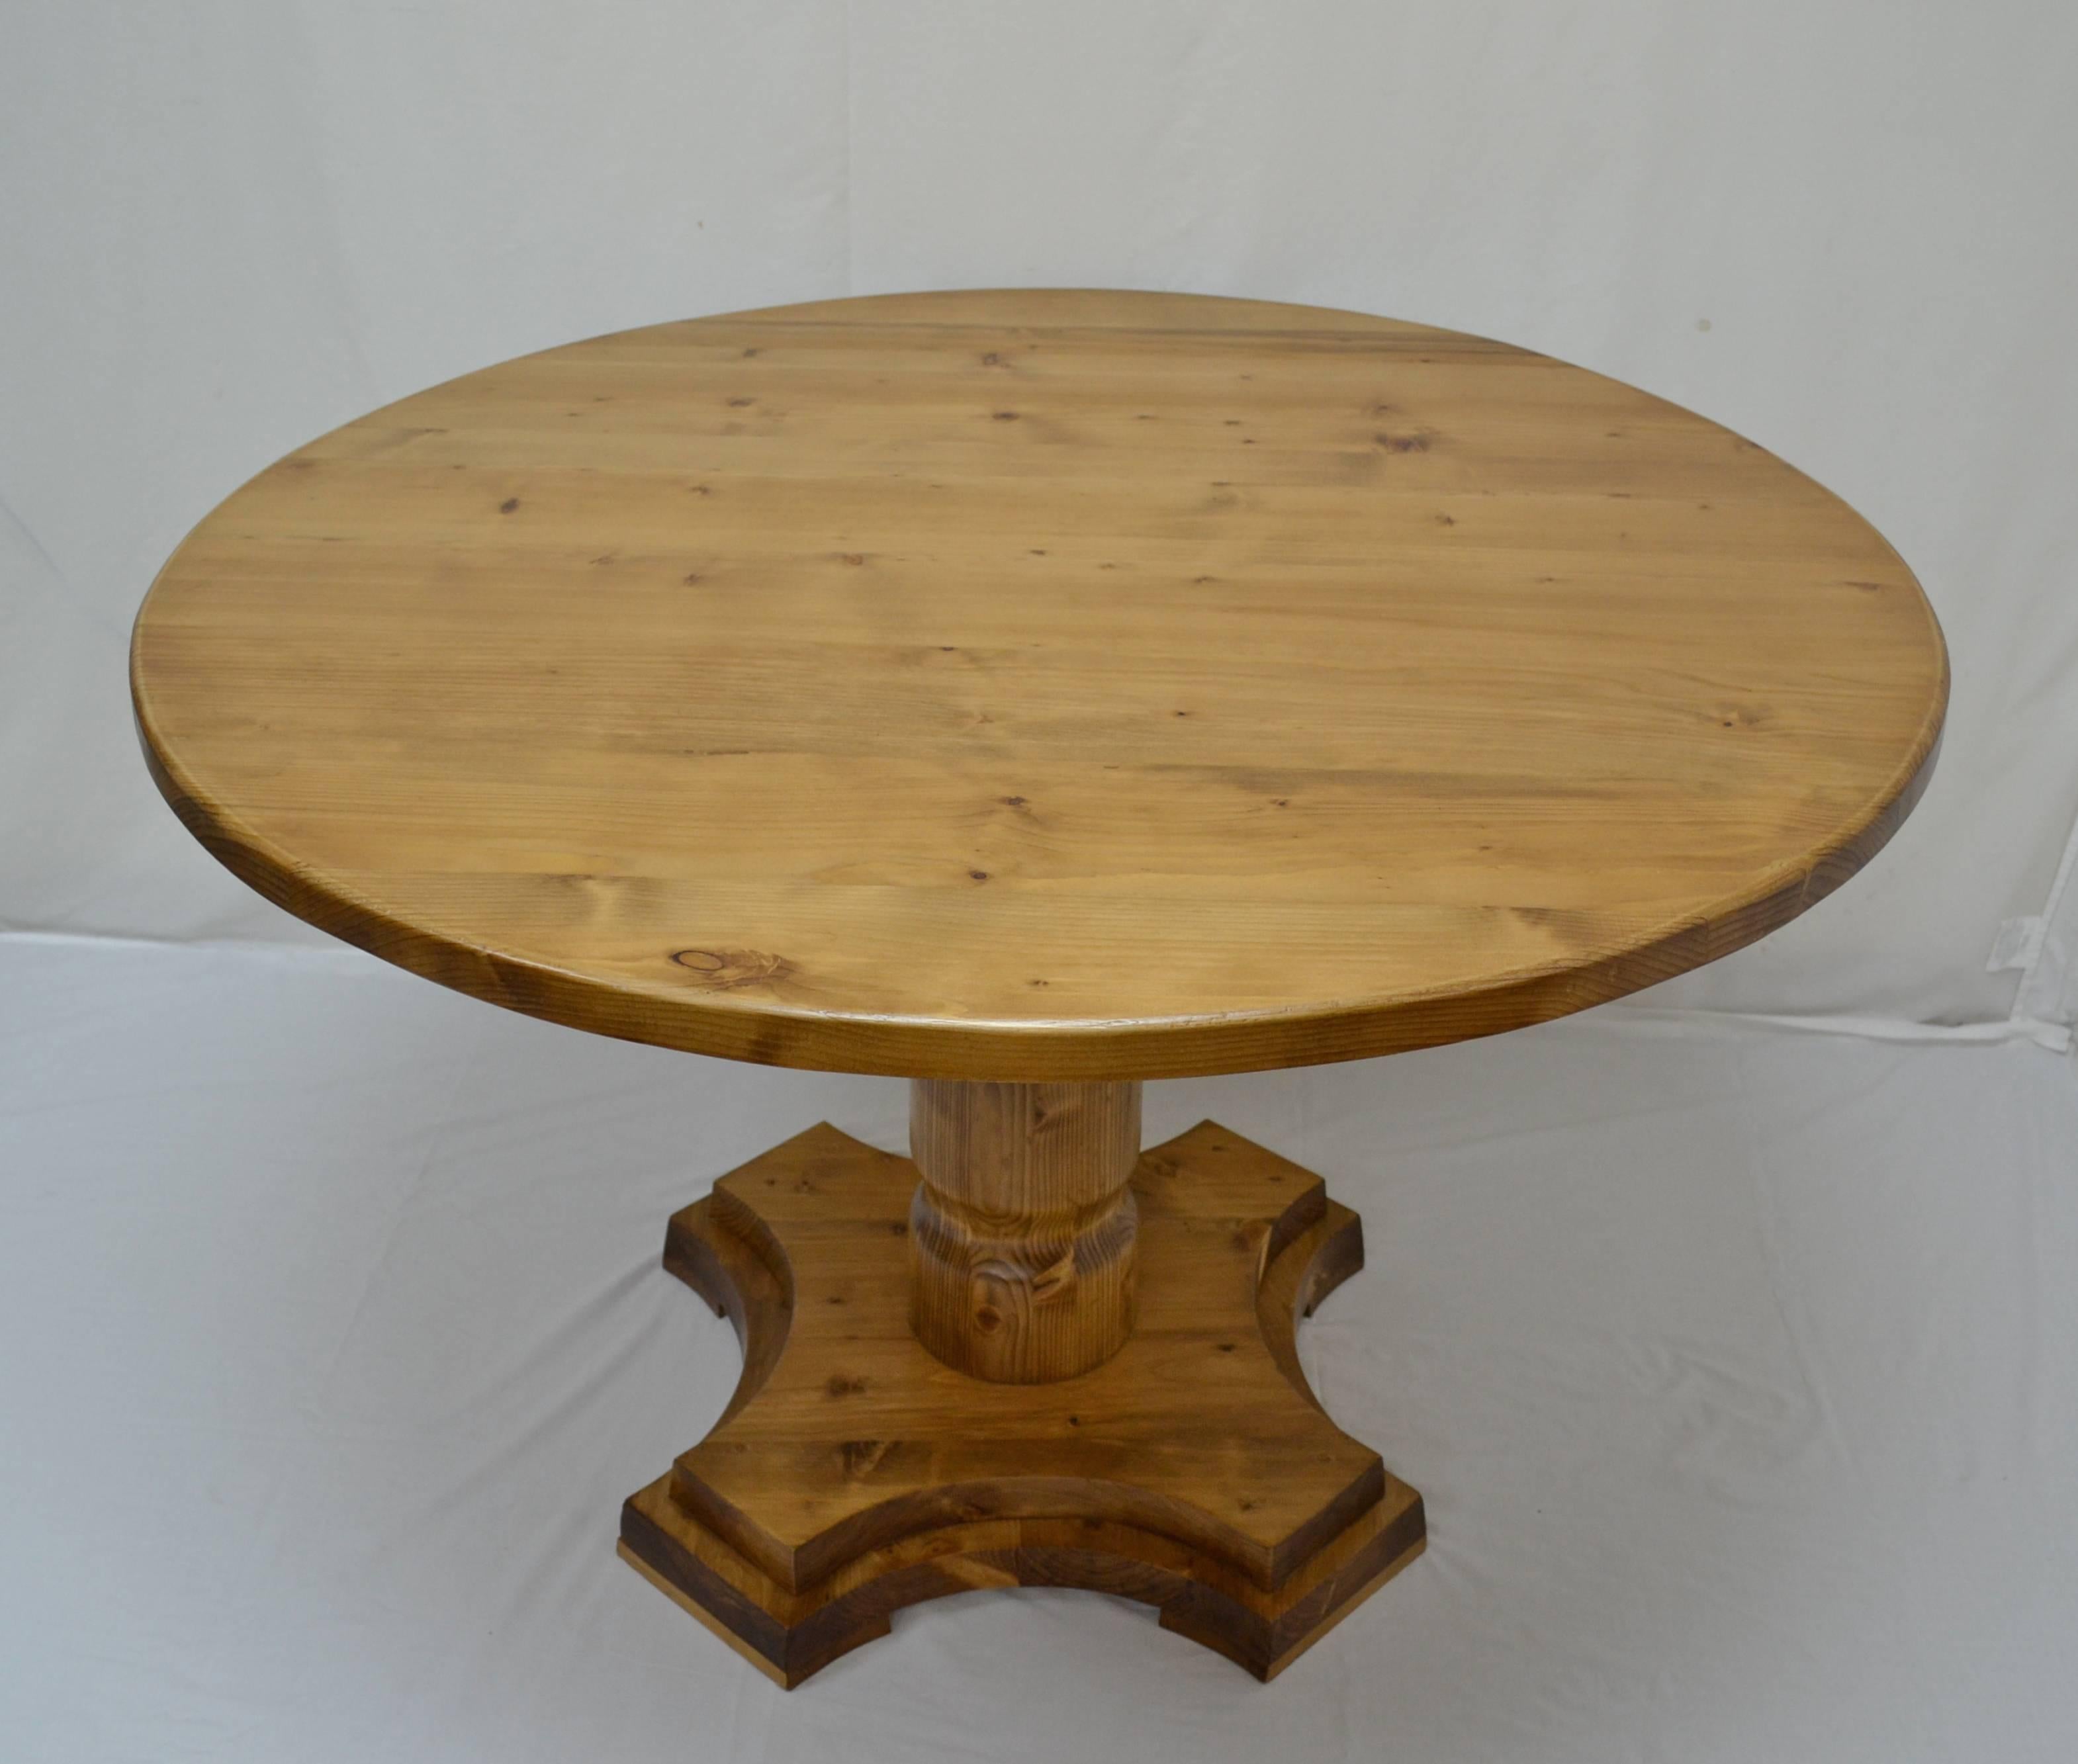 Antique pine pedestal tables are extremely hard to find so our workshop in Europe has taken lightly-used reclaimed pine to fashion this plain and simple reproduction. The 1.25” thick top with a softened edge is mounted on a slightly tapering waisted